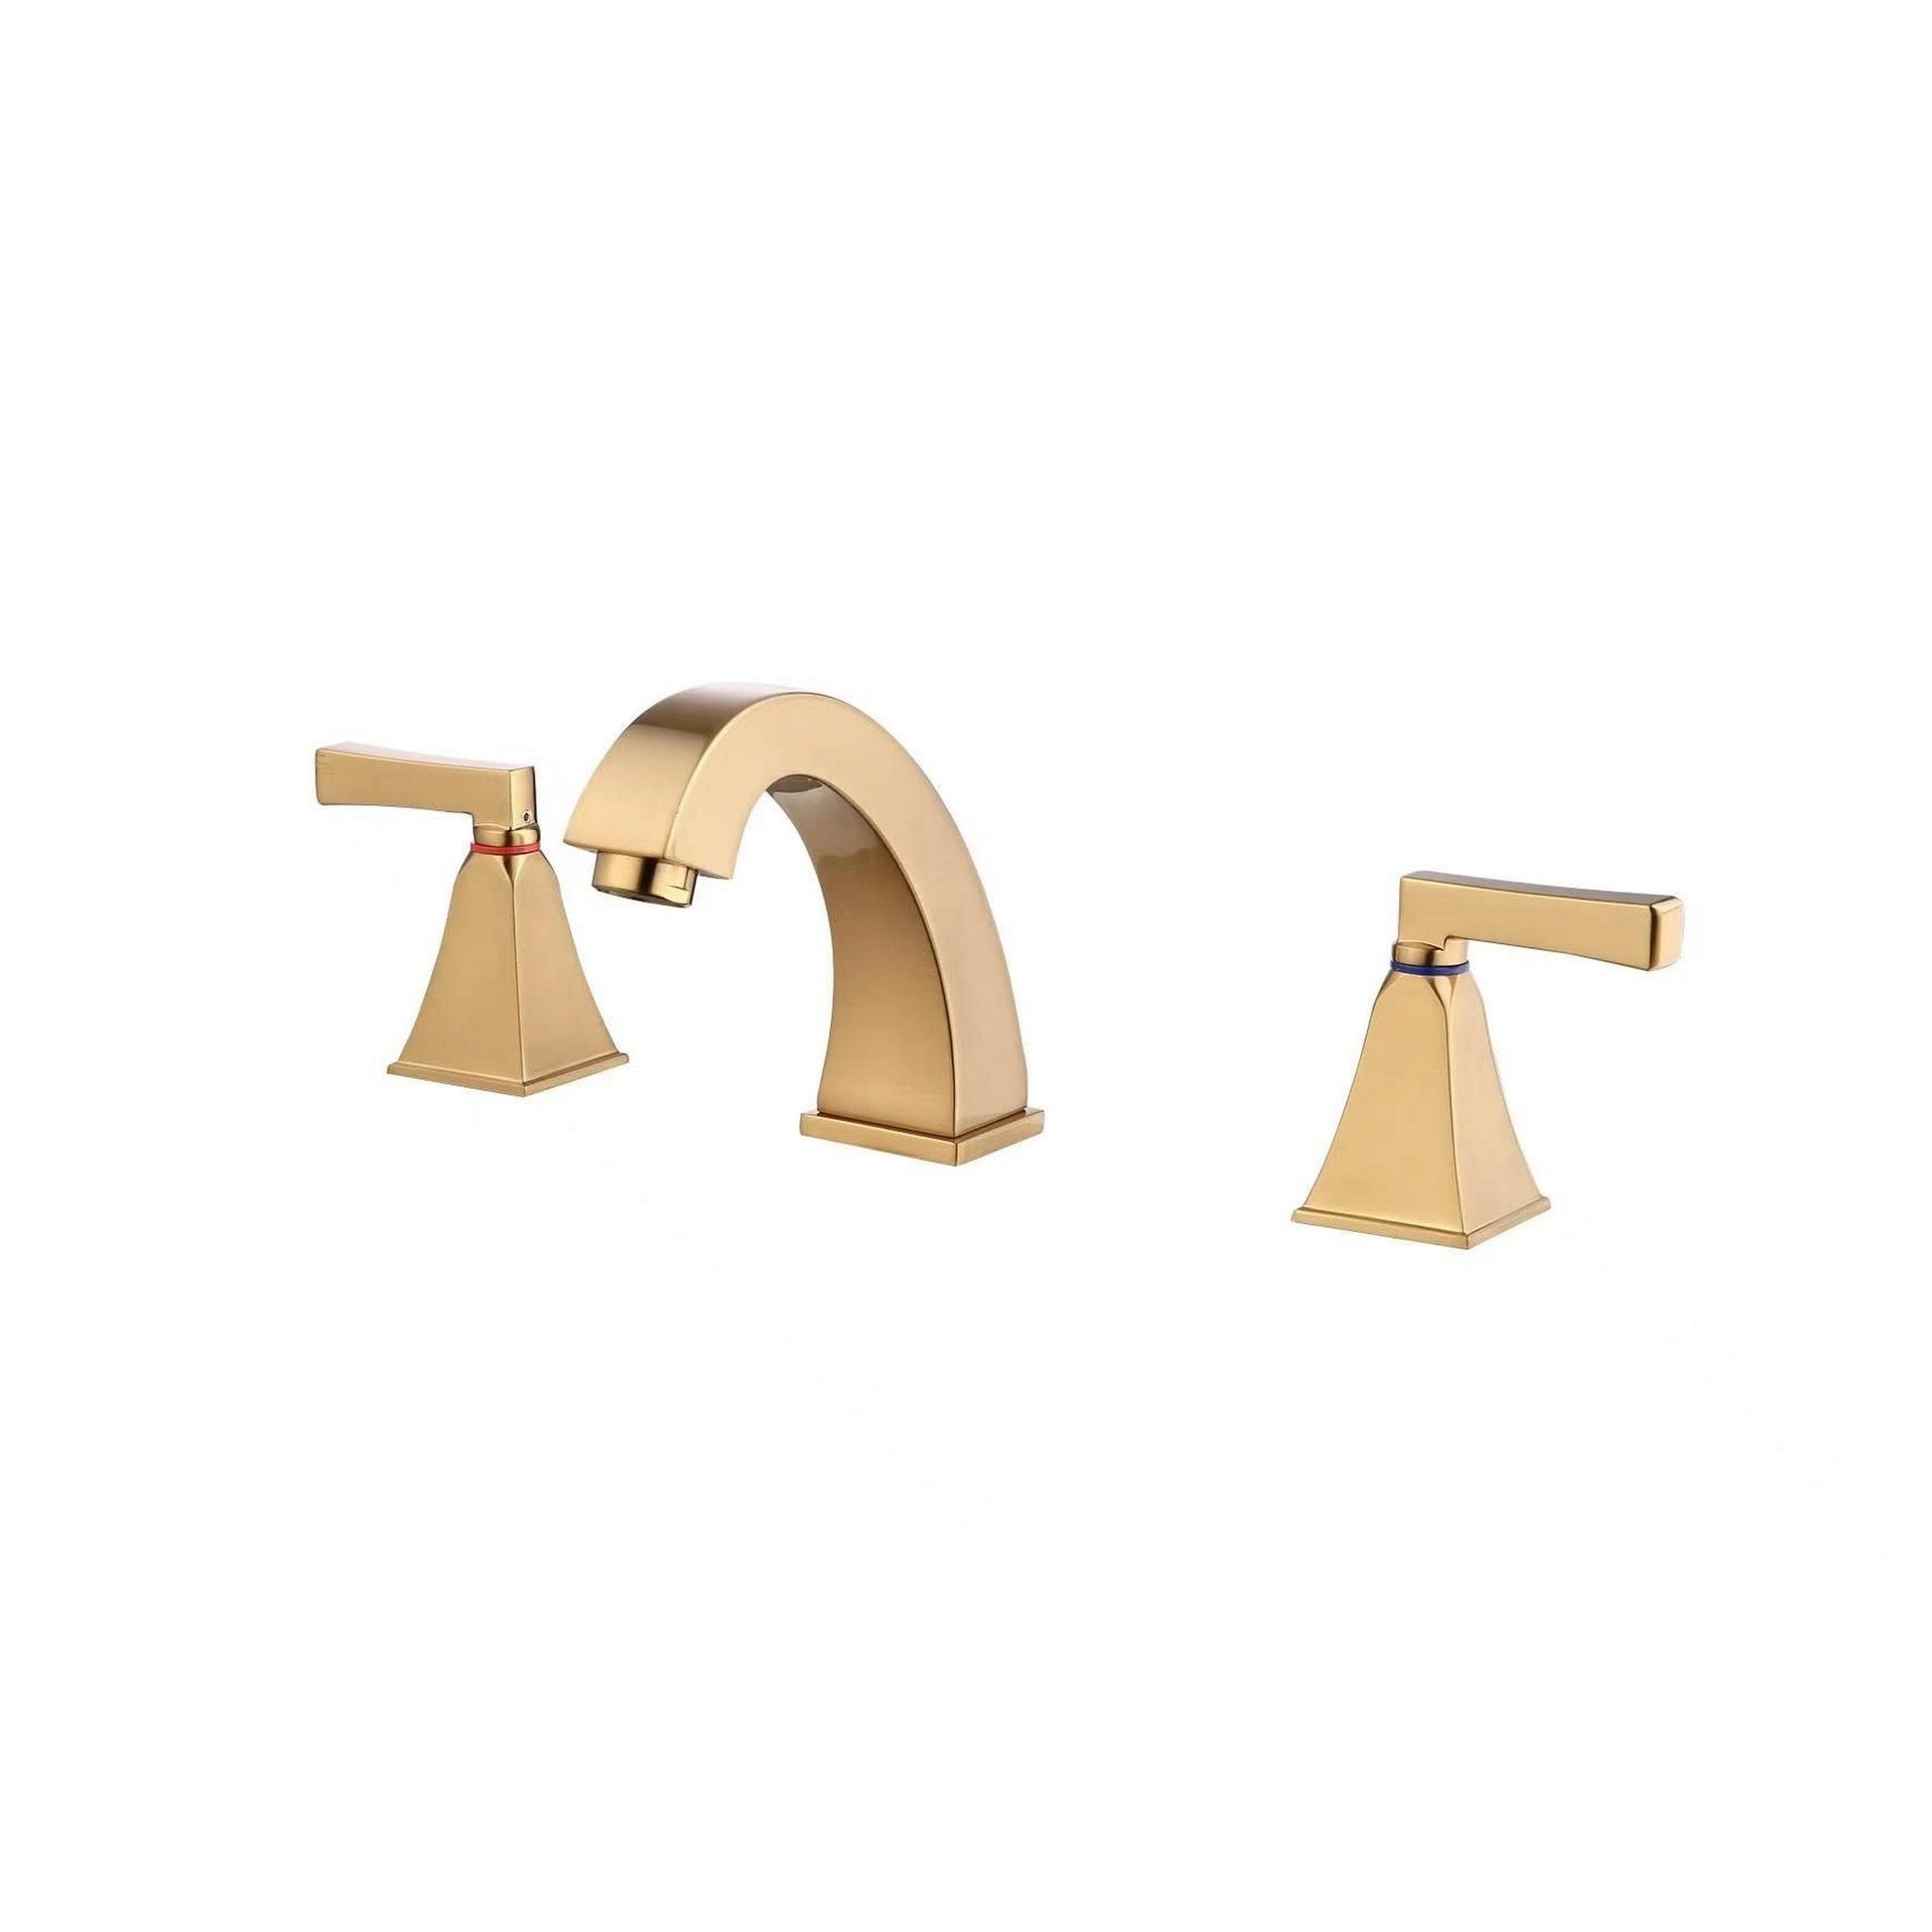 Ratel 3-Hole Champagne Bronze Widespread Bathroom Faucet